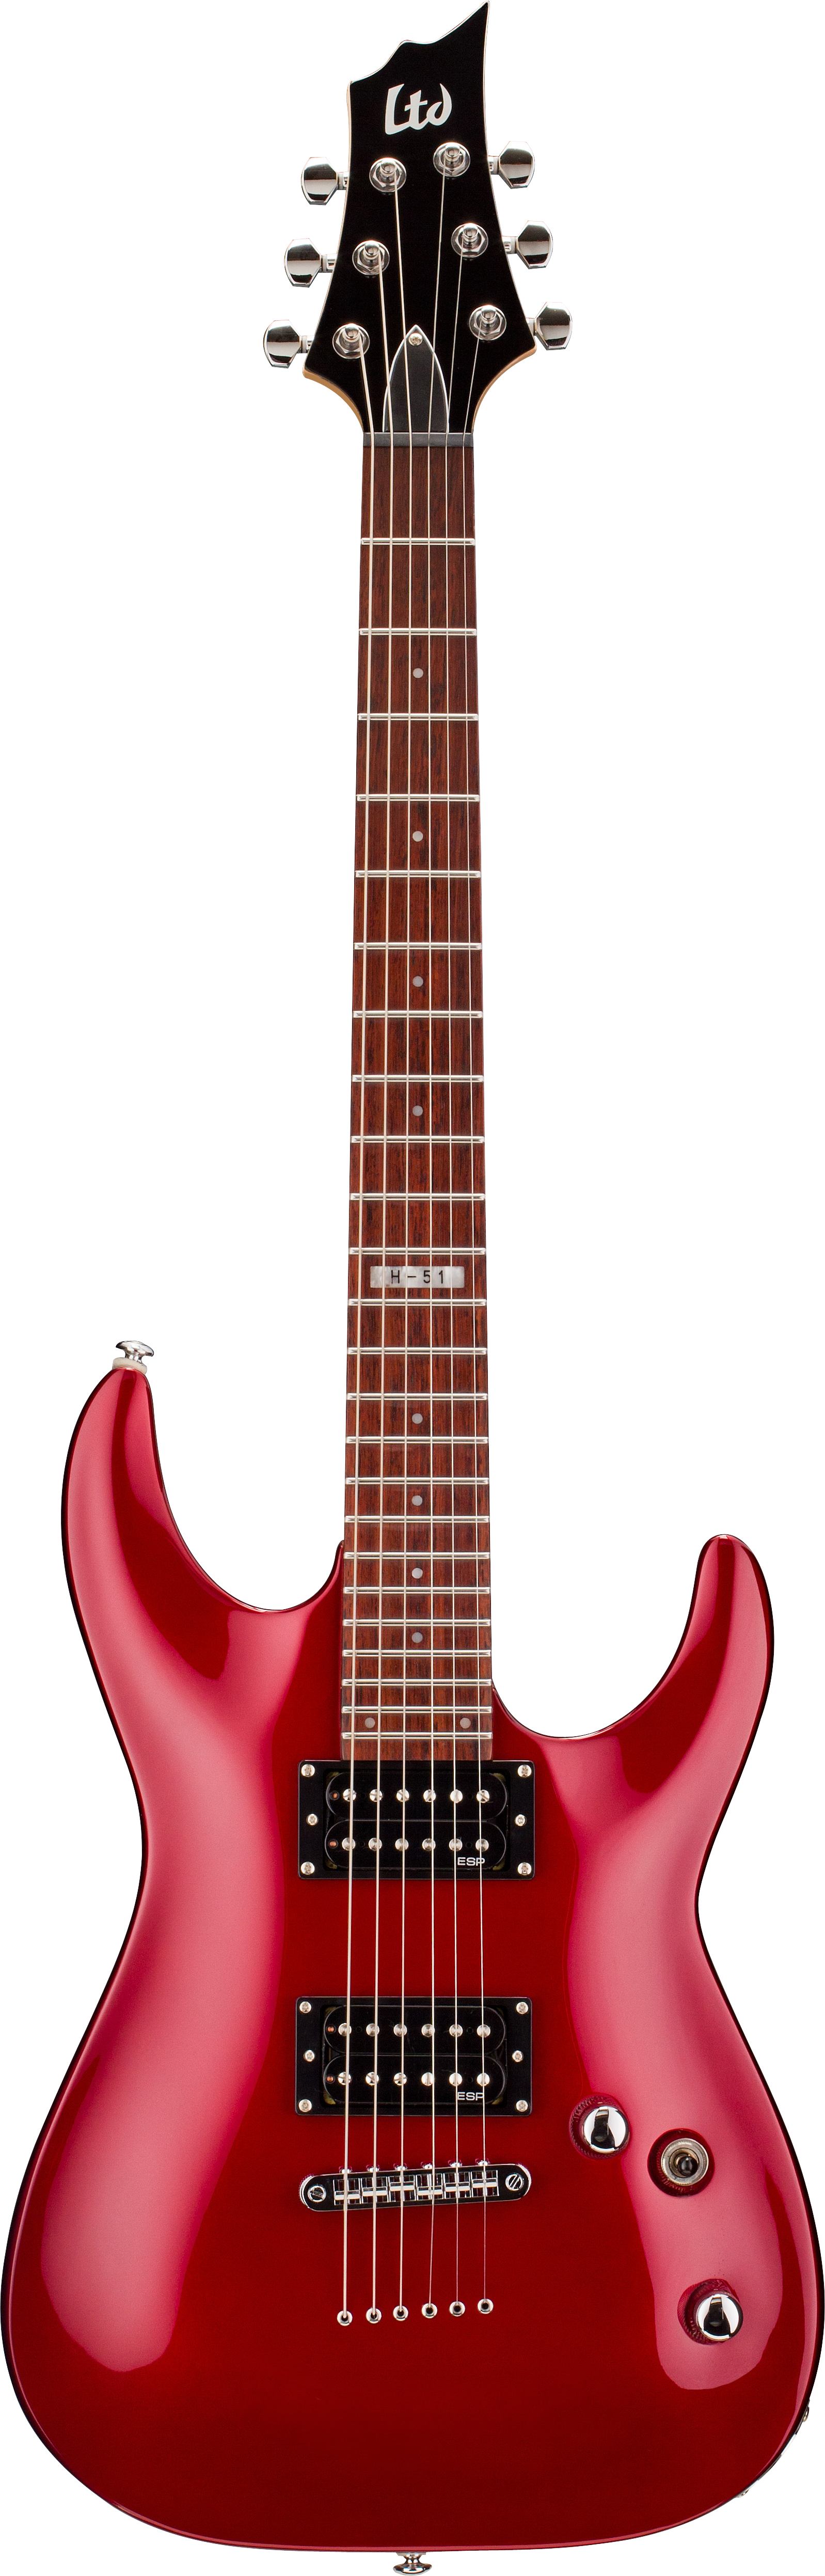 Guitar clipart red guitar. Png image 